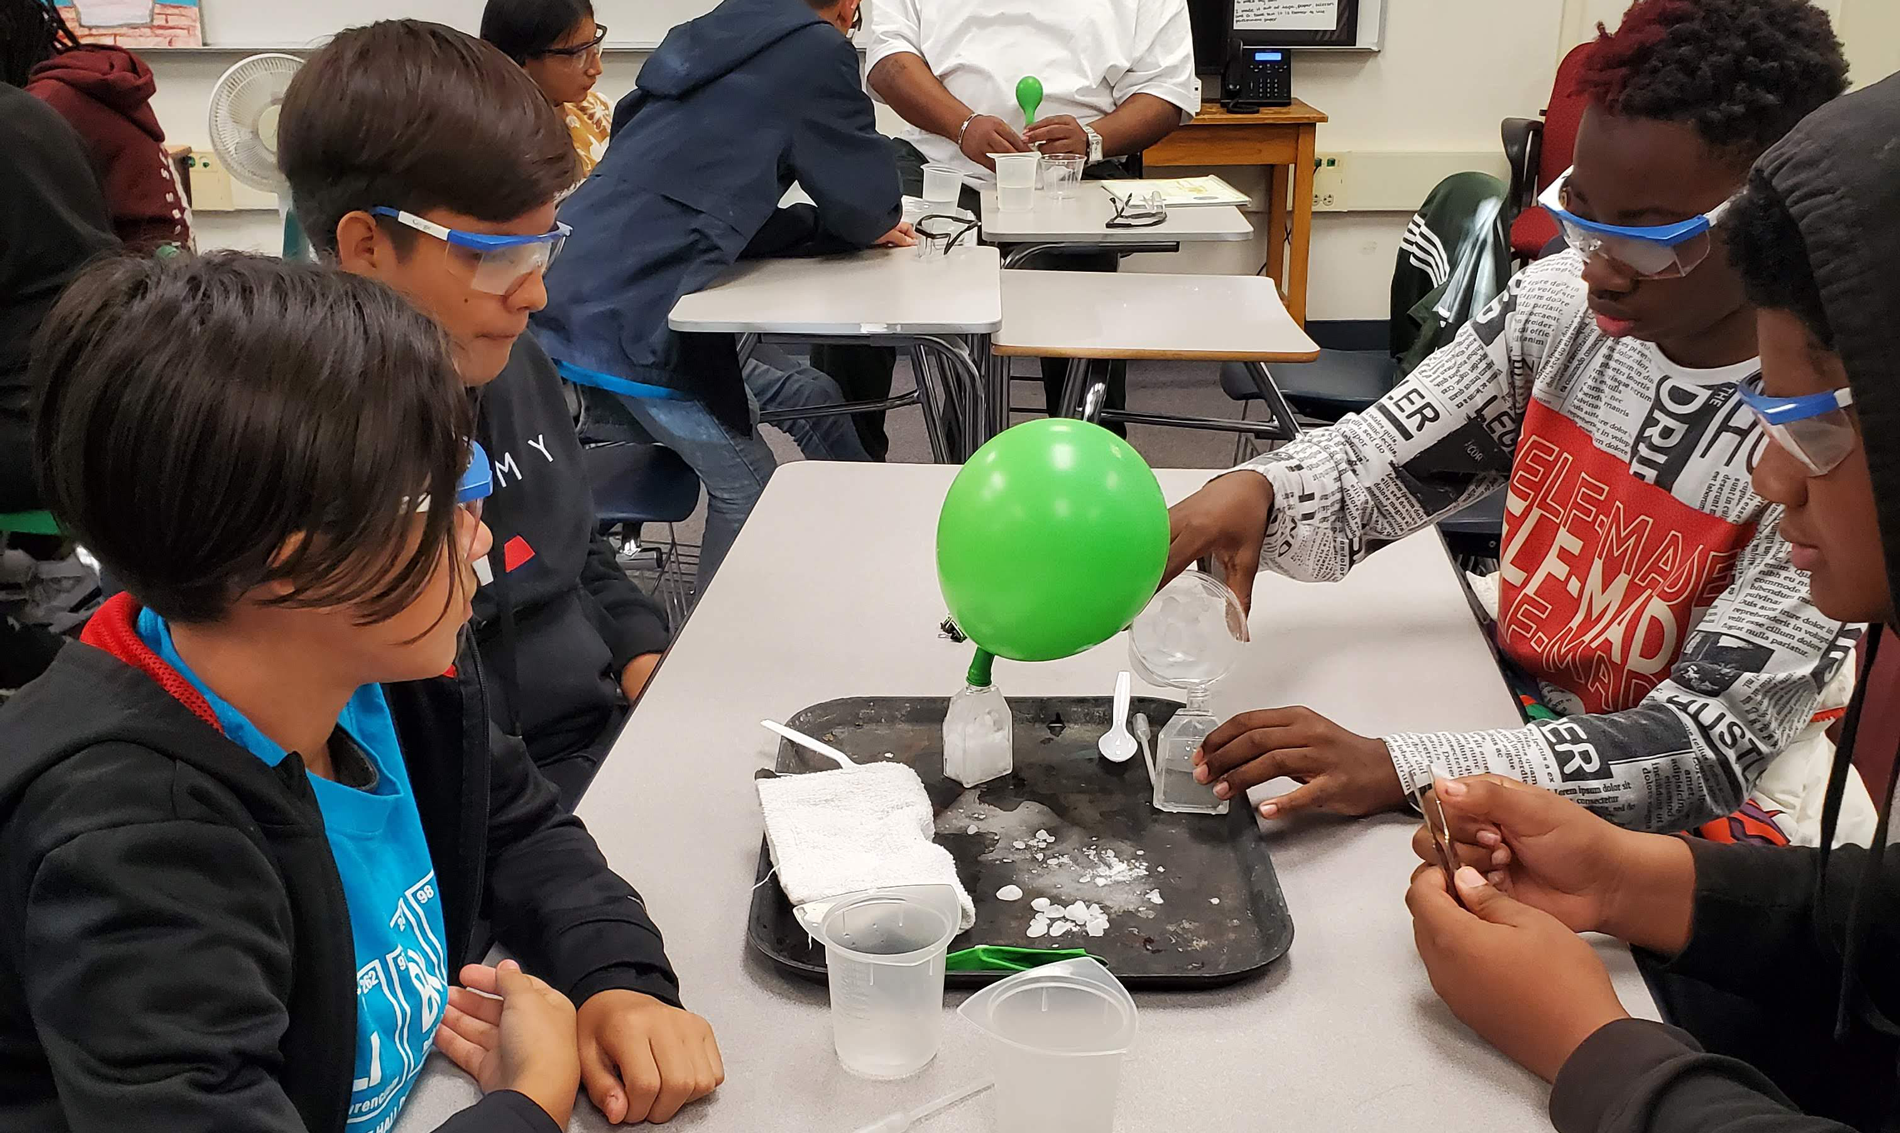 Students are around a table participating in a science experiment with dry ice.